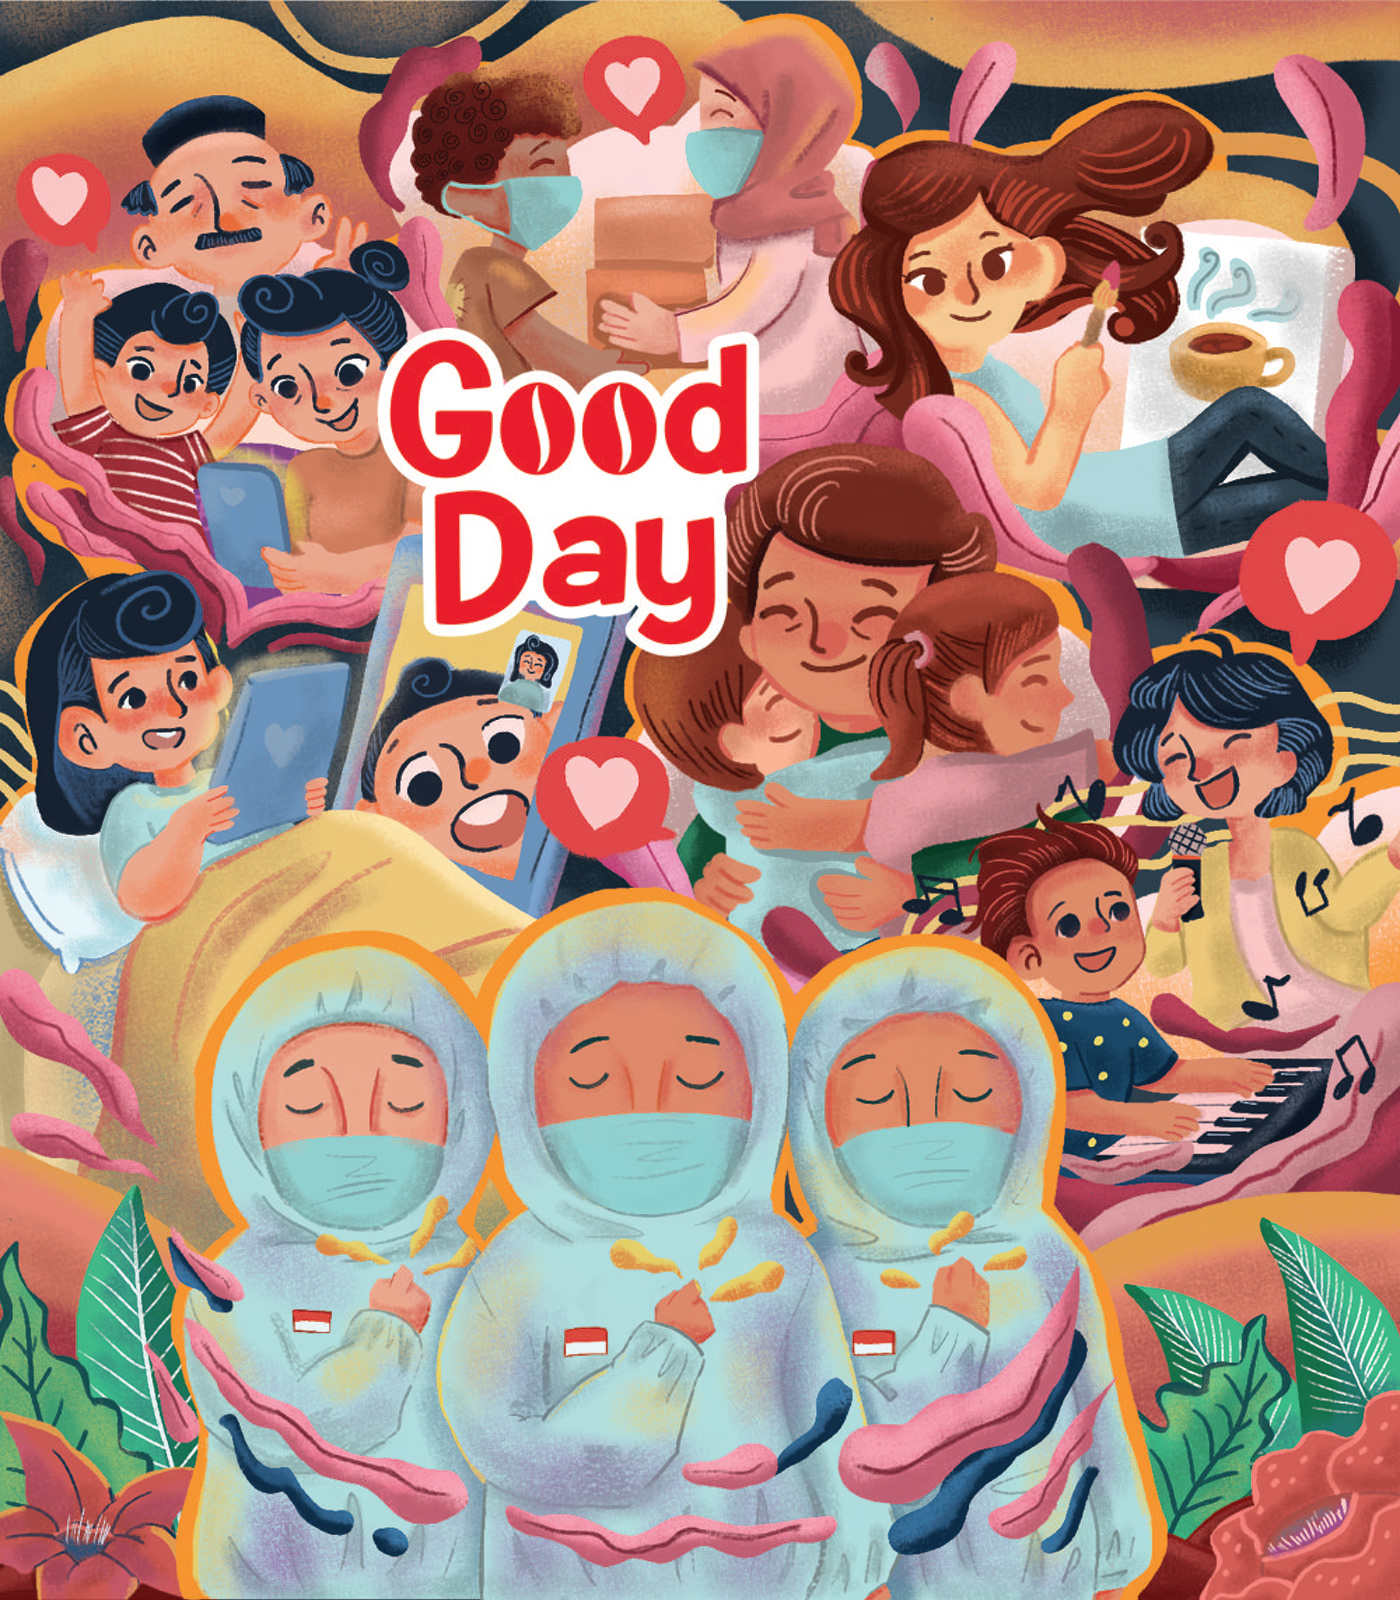 Competition Design Label gaul creation goodday ILLUSTRATION  Label label illustration